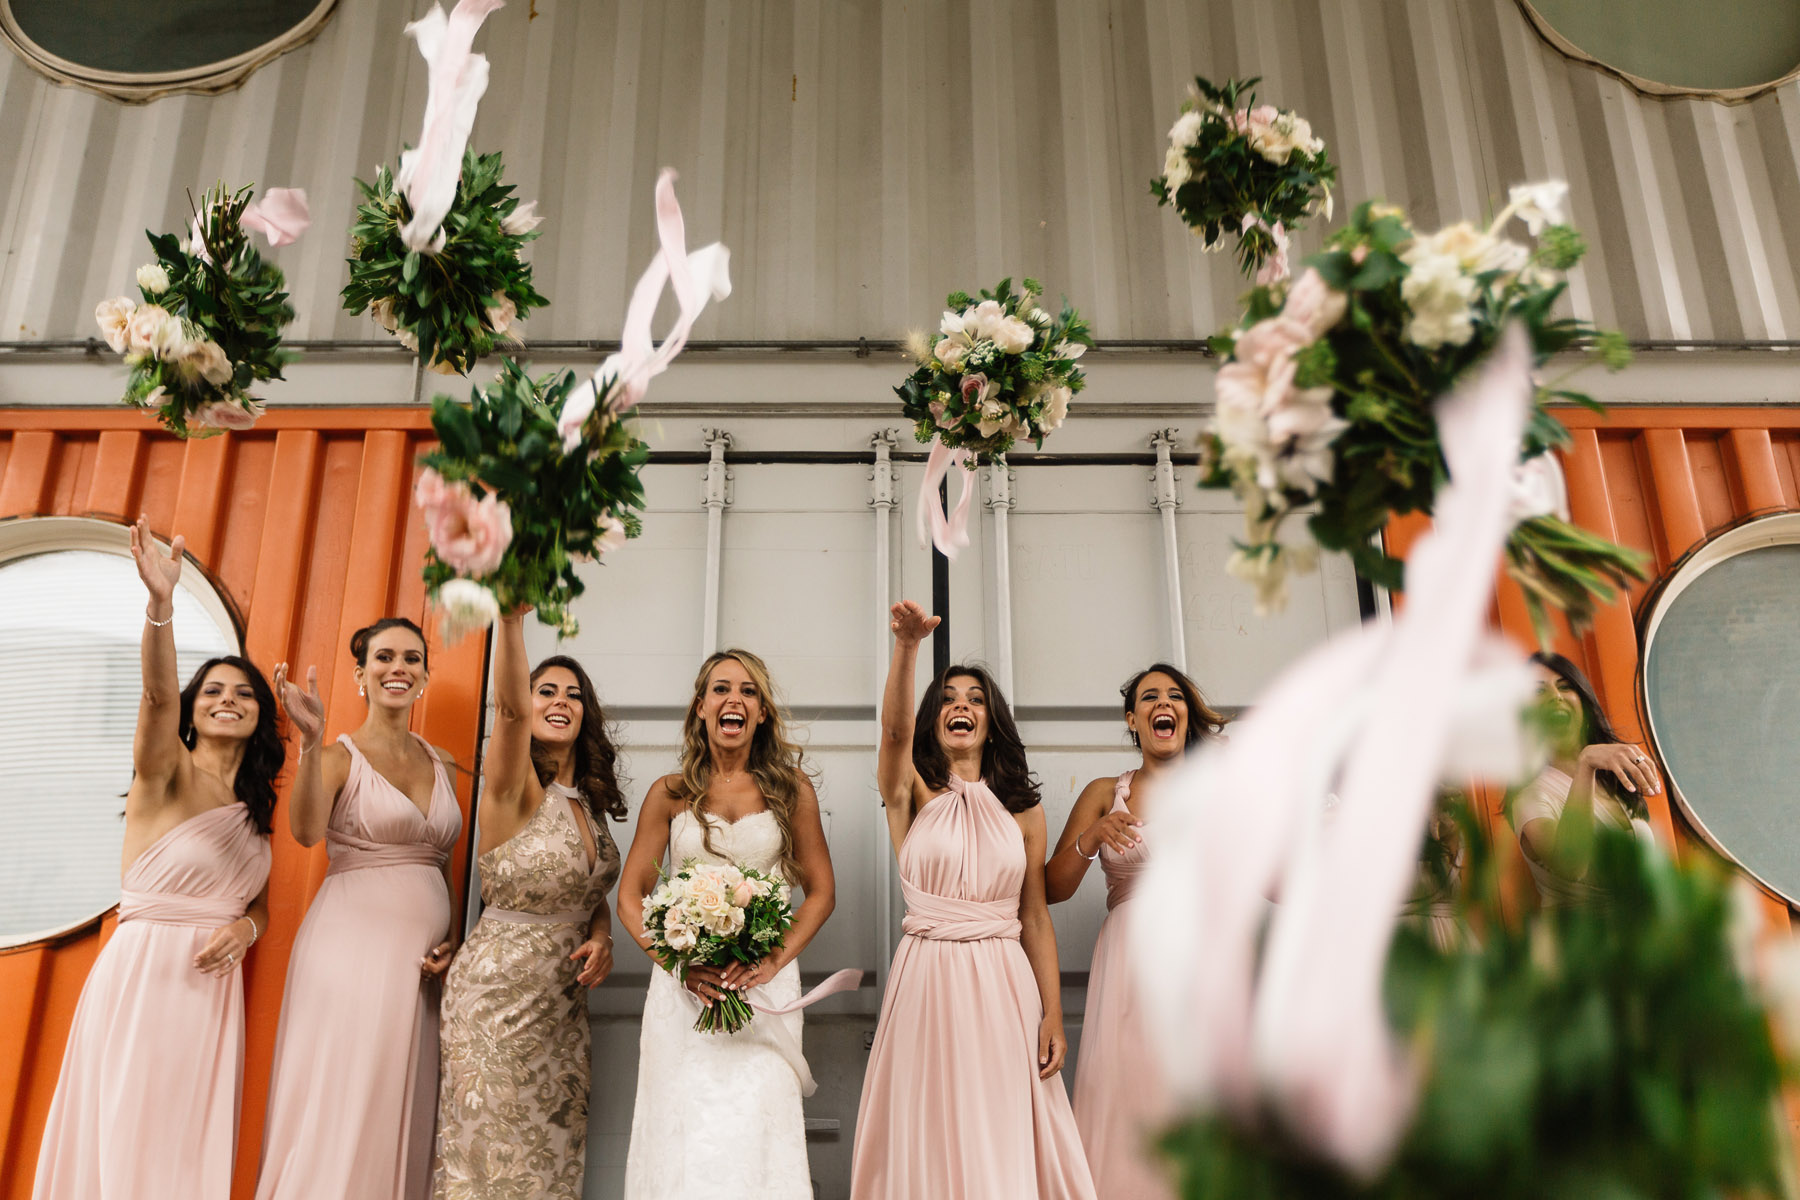 stefan + Kerri's awesome wedding photographs at Trinity Buoy Wharf in London with a Greek wedding service and subtle touches of greek wedding traditions.